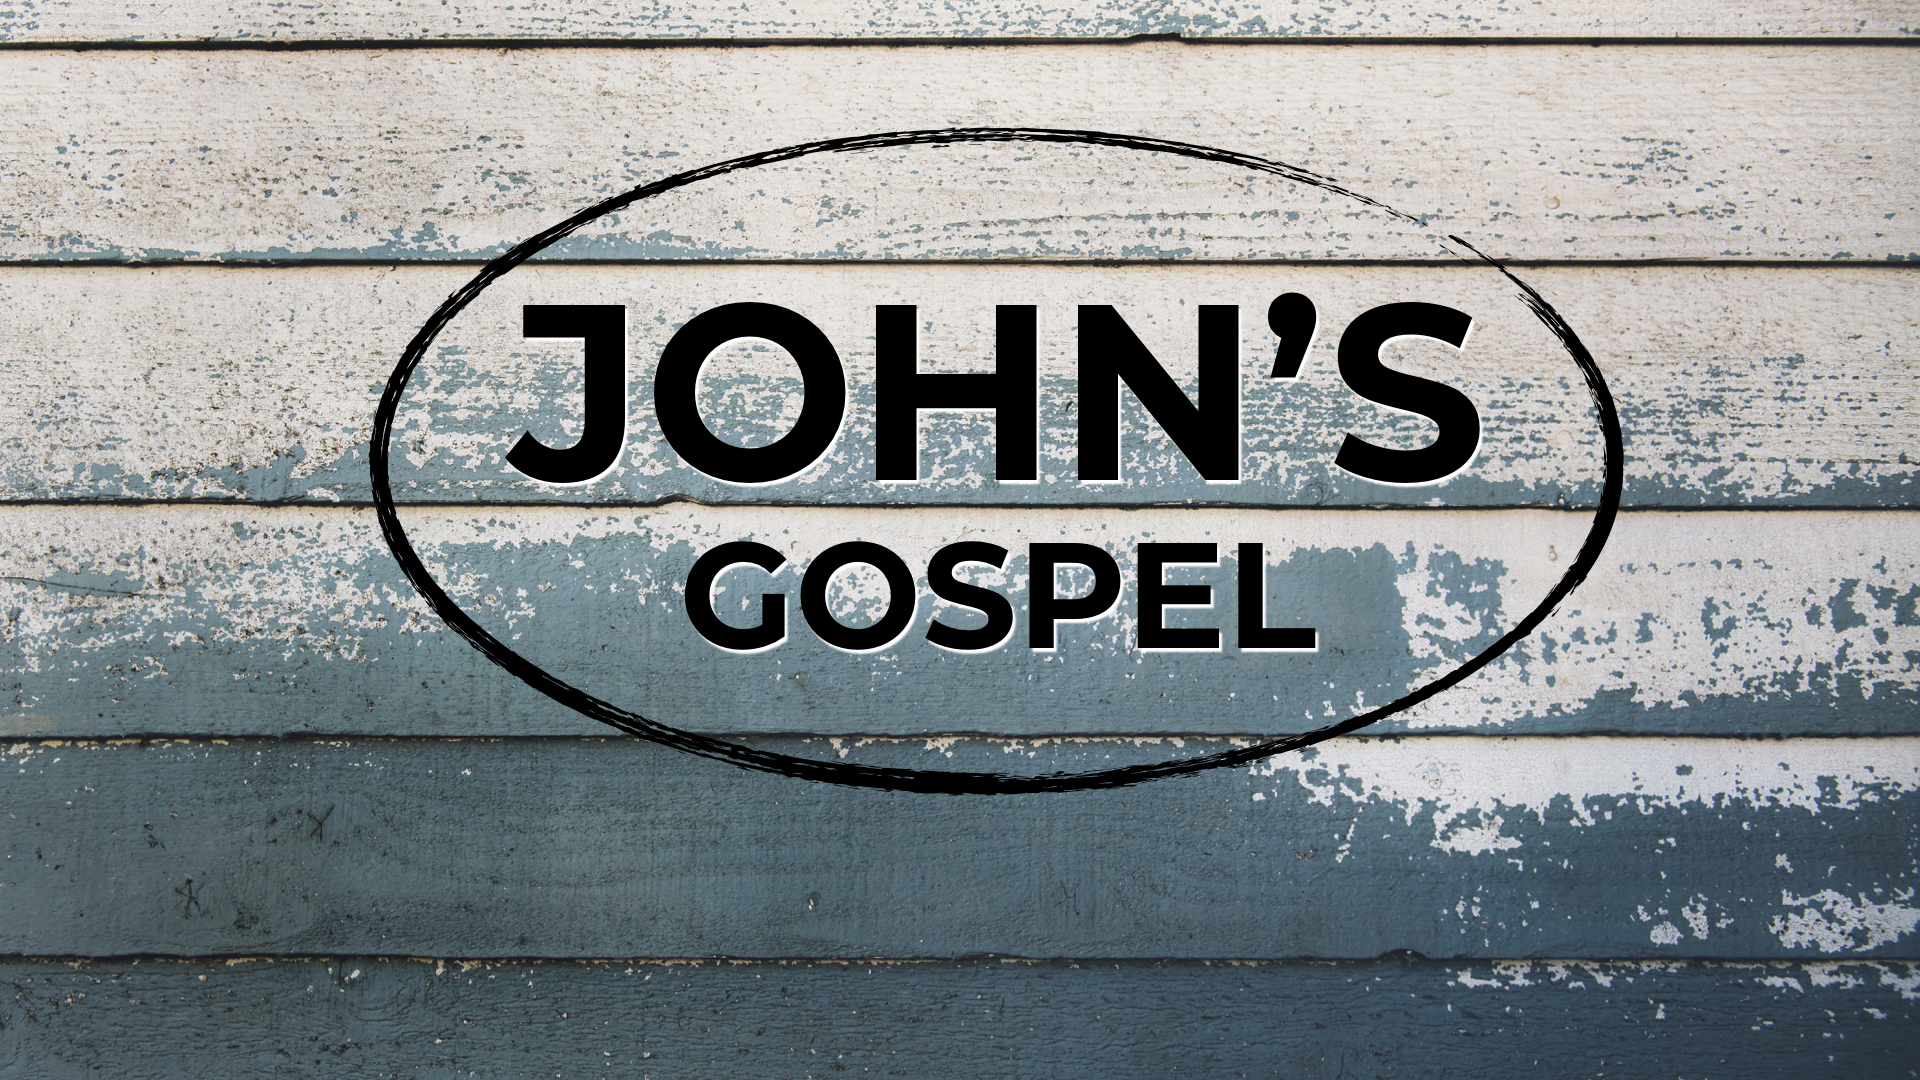 05.17.20 – will the real jesus please stand up? – jared stigler